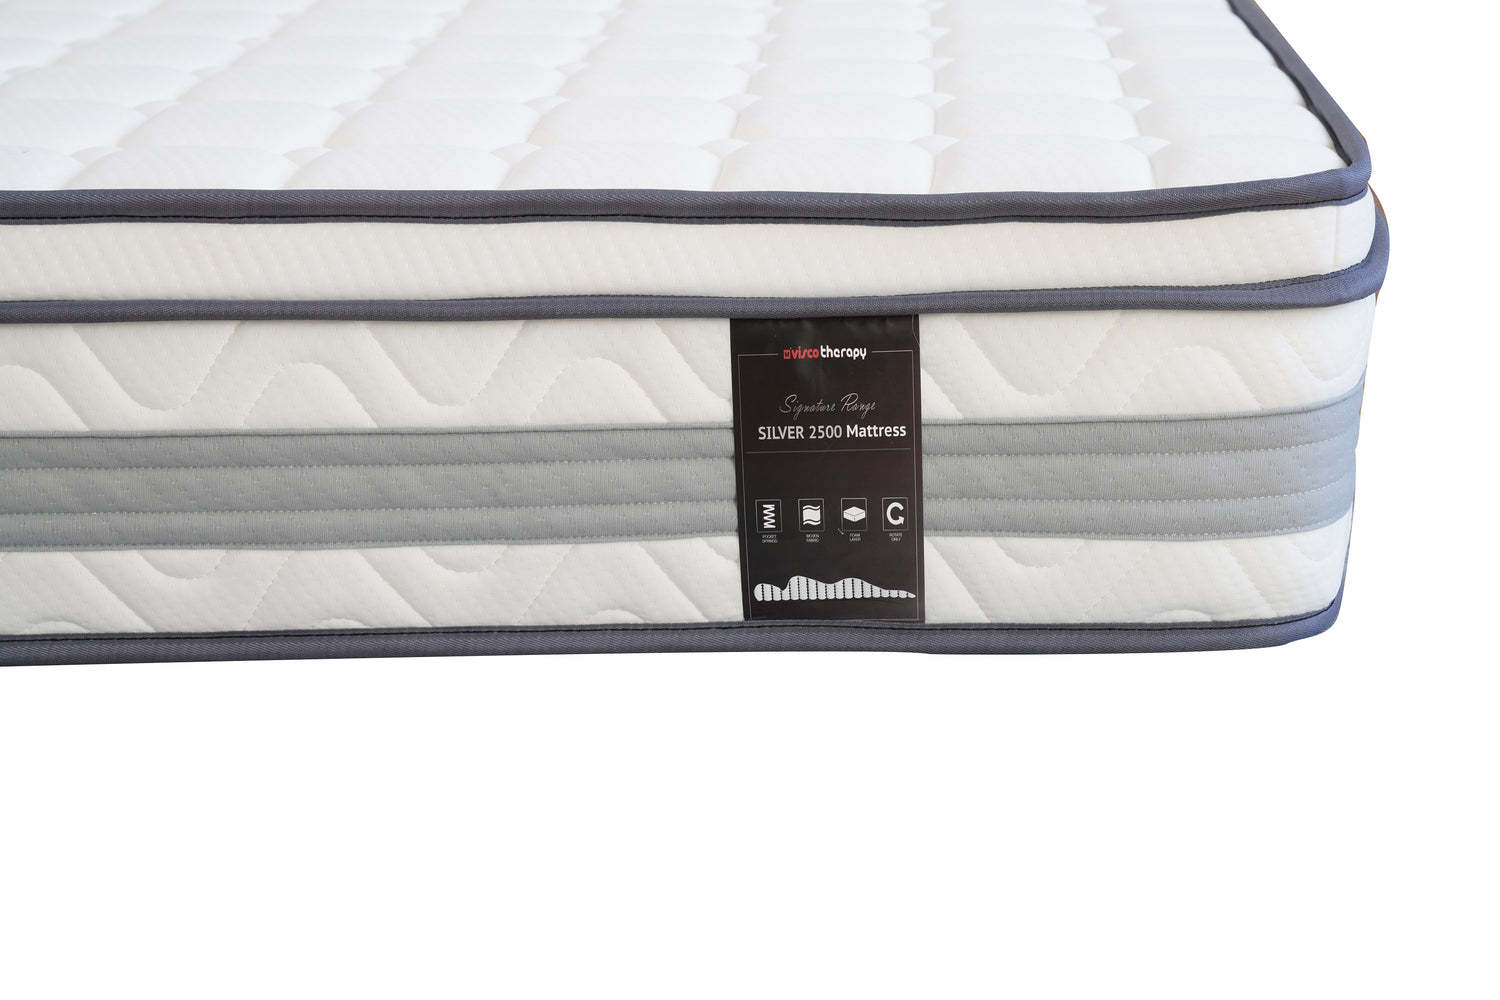 Visco Therapy Silver 2500 Mattress From Side-Better Bed Company